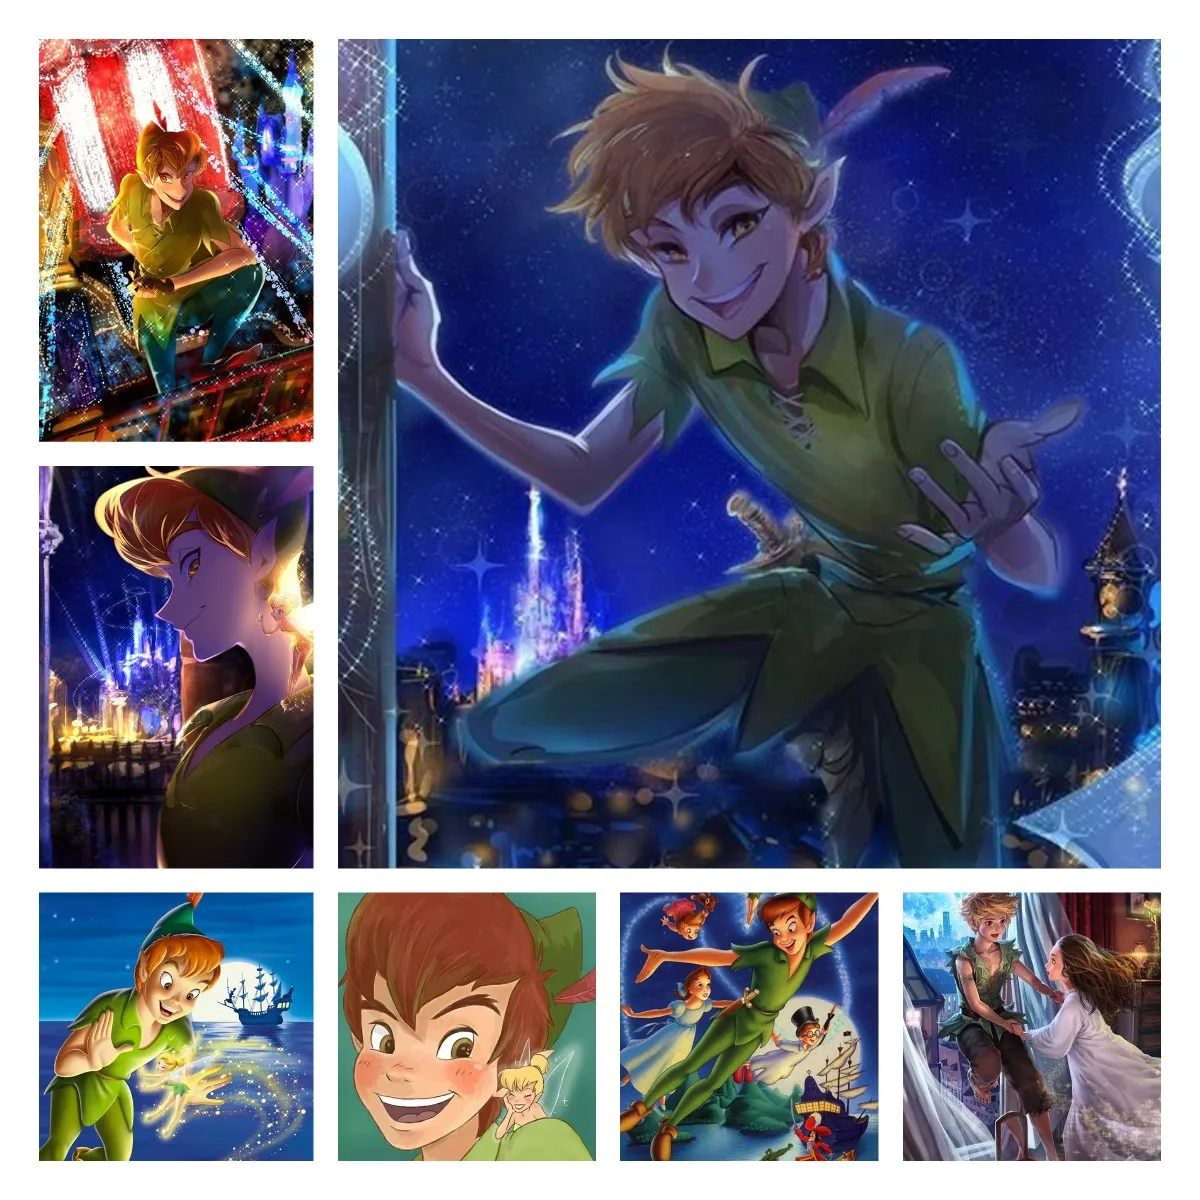 Canvas Painting Disney Peter Pan Cartoon Movie Poster Modern Interior Home  Decor Posters Prints For Kids Bedroom Room Decoration - Painting &  Calligraphy - AliExpress